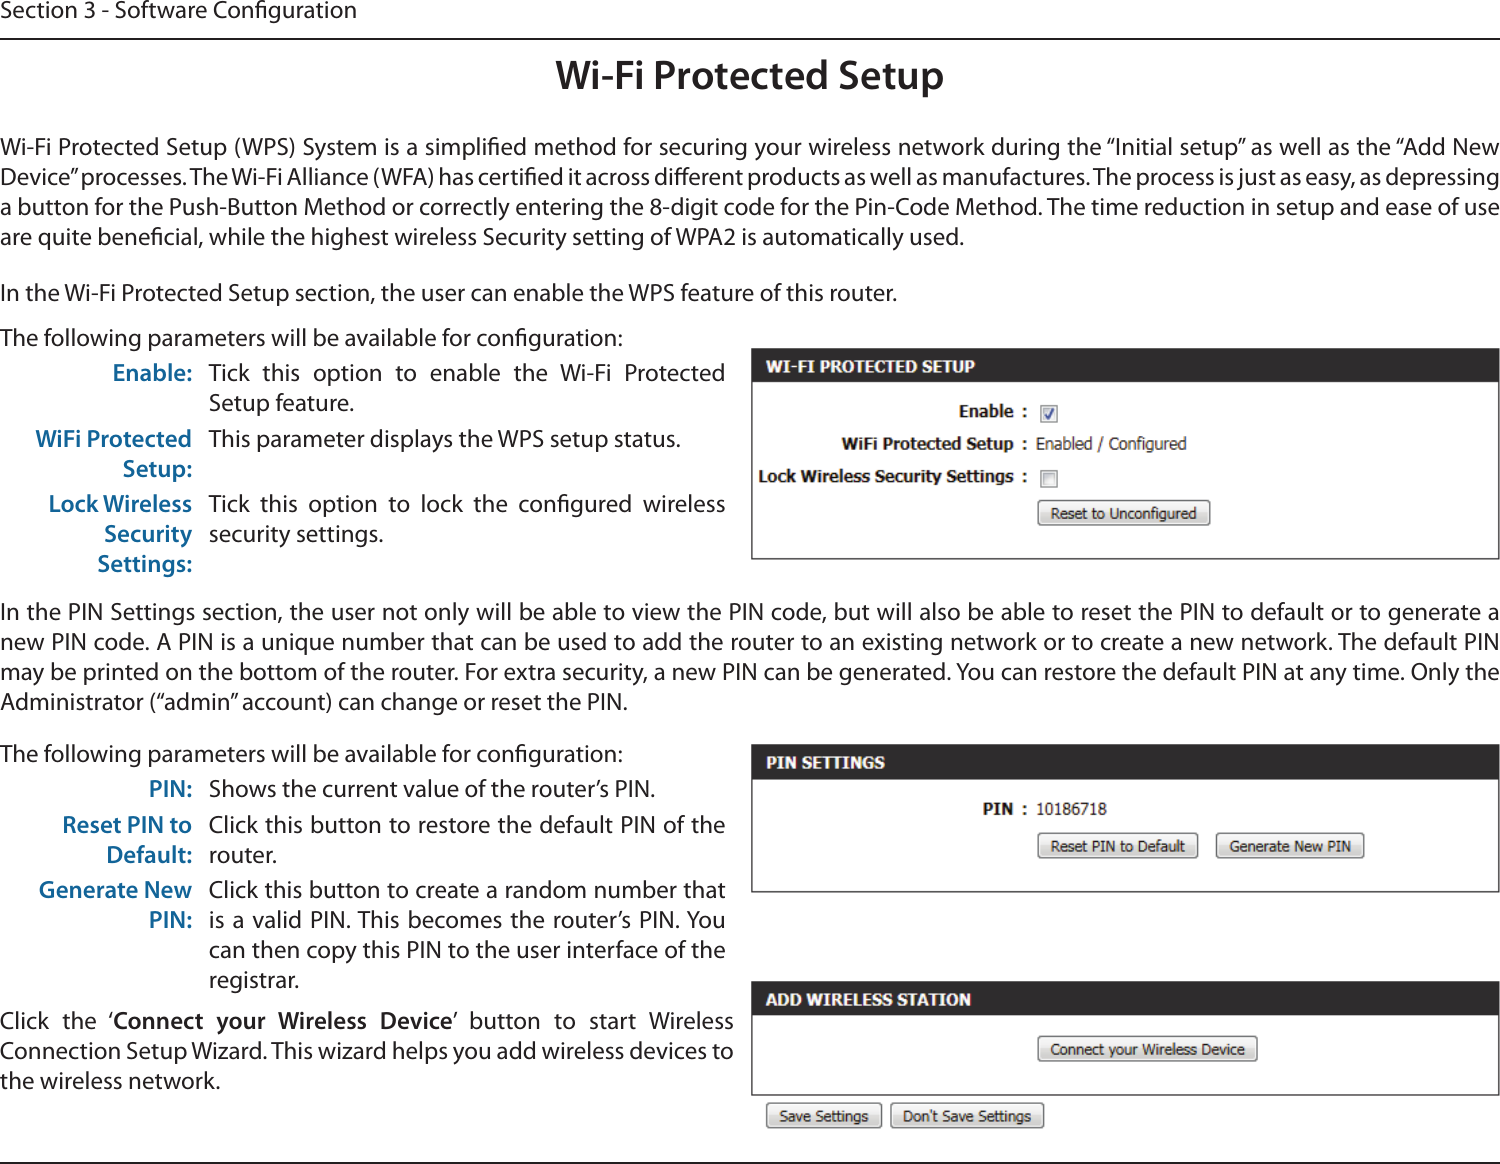 Section 3 - Software CongurationWi-Fi Protected SetupWi-Fi Protected Setup (WPS) System is a simplied method for securing your wireless network during the “Initial setup” as well as the “Add New Device” processes. The Wi-Fi Alliance (WFA) has certied it across dierent products as well as manufactures. The process is just as easy, as depressing a button for the Push-Button Method or correctly entering the 8-digit code for the Pin-Code Method. The time reduction in setup and ease of use are quite benecial, while the highest wireless Security setting of WPA2 is automatically used.The following parameters will be available for conguration:Enable: Tick  this  option  to  enable  the  Wi-Fi  Protected Setup feature.WiFi Protected Setup:This parameter displays the WPS setup status.Lock Wireless Security Settings:Tick  this  option  to  lock  the  congured  wireless security settings.In the PIN Settings section, the user not only will be able to view the PIN code, but will also be able to reset the PIN to default or to generate a new PIN code. A PIN is a unique number that can be used to add the router to an existing network or to create a new network. The default PIN may be printed on the bottom of the router. For extra security, a new PIN can be generated. You can restore the default PIN at any time. Only the Administrator (“admin” account) can change or reset the PIN.In the Wi-Fi Protected Setup section, the user can enable the WPS feature of this router. The following parameters will be available for conguration:PIN: Shows the current value of the router’s PIN.Reset PIN to Default:Click this button to restore the default PIN of the router.Generate New PIN:Click this button to create a random number that is a valid PIN. This  becomes the router’s PIN. You can then copy this PIN to the user interface of the registrar.Click  the  ‘Connect  your  Wireless  Device’  button  to  start  Wireless Connection Setup Wizard. This wizard helps you add wireless devices to the wireless network.